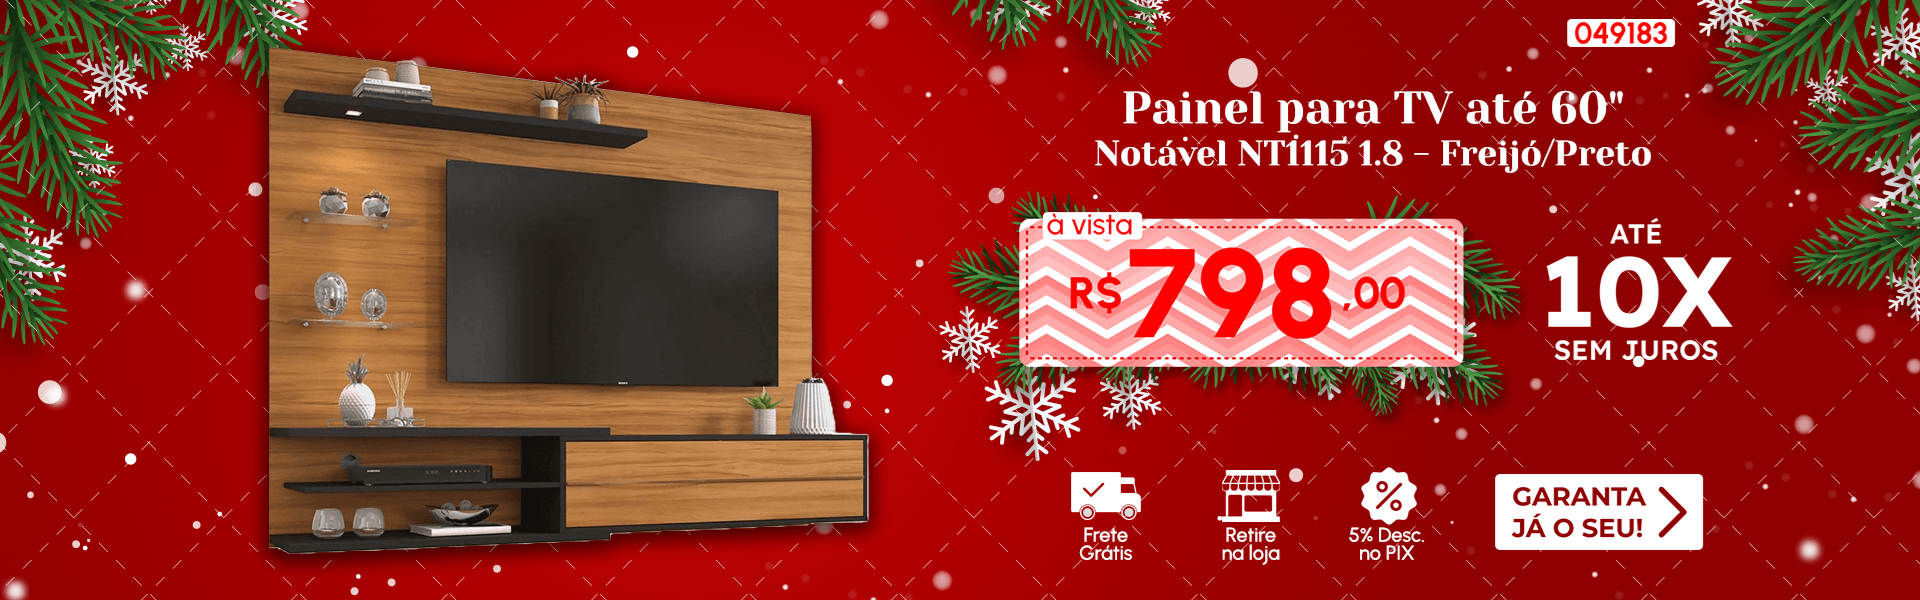 Painel Notavel NT1115